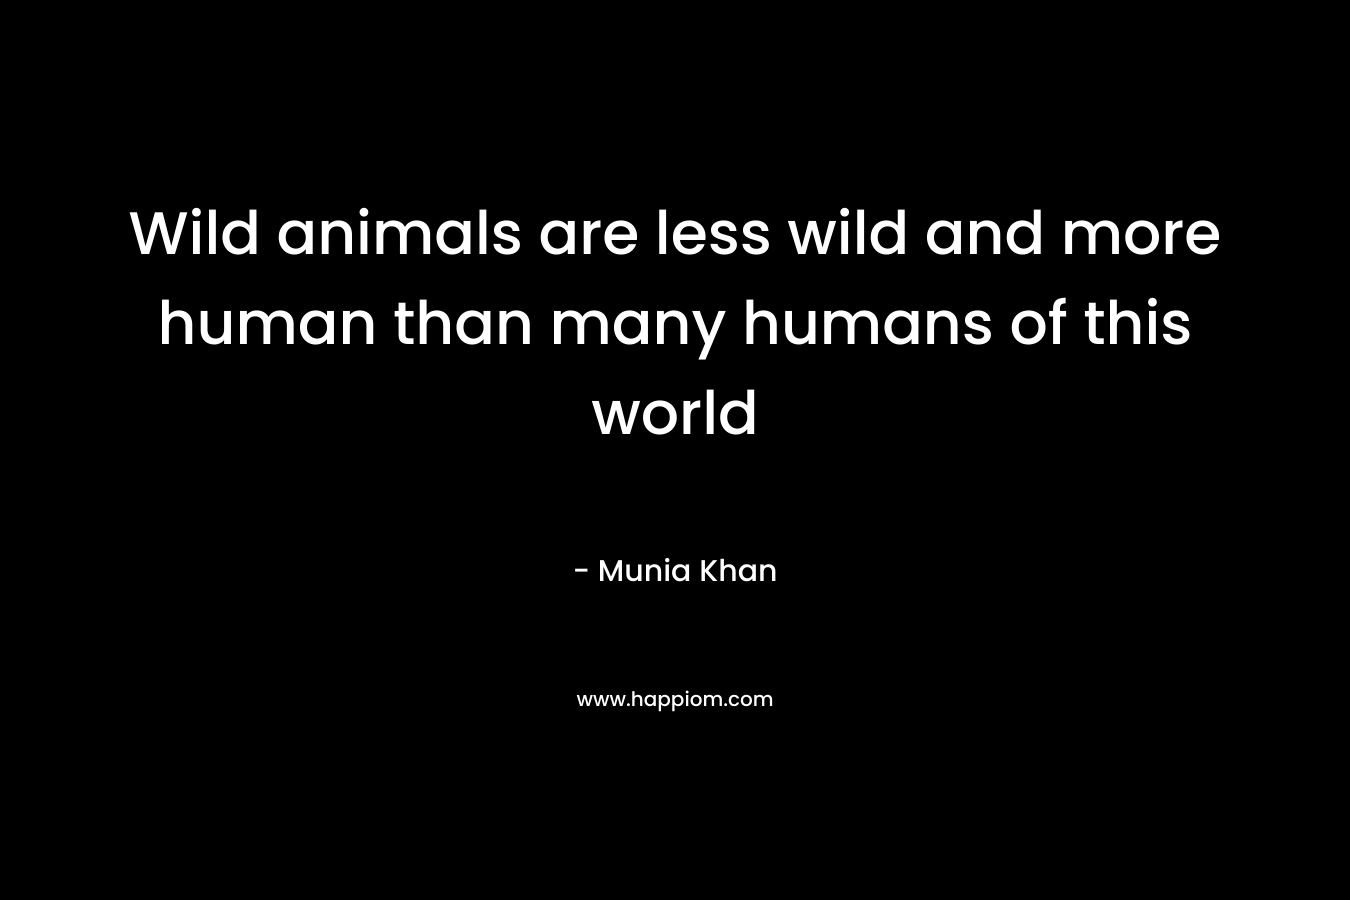 Wild animals are less wild and more human than many humans of this world